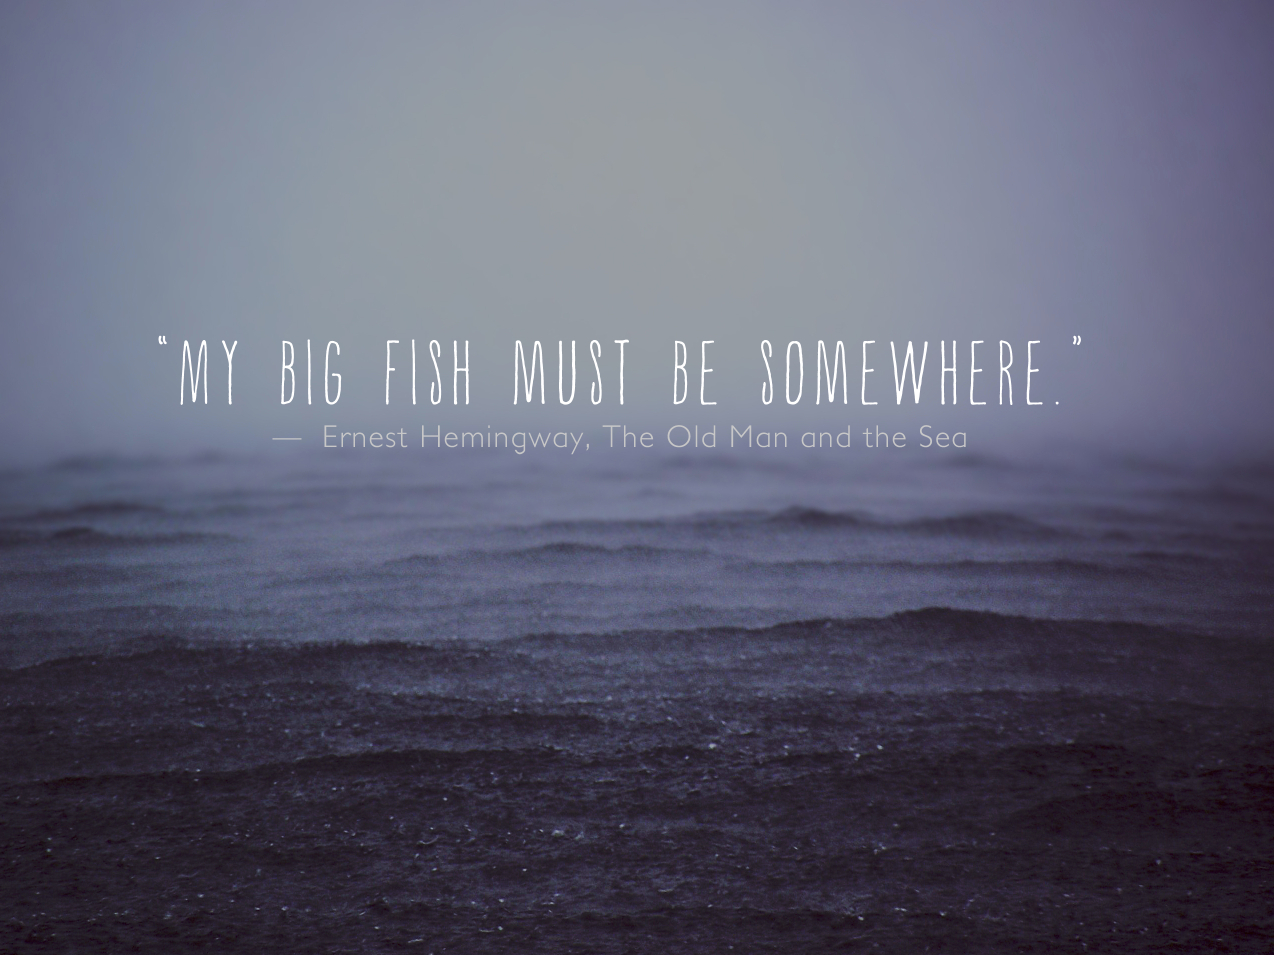 ernest-hemingway-the-old-man-and-the-sea-quotes-i-just-read-the-old-man-and-the-sea-this-morning-it-was-worth-a.jpg